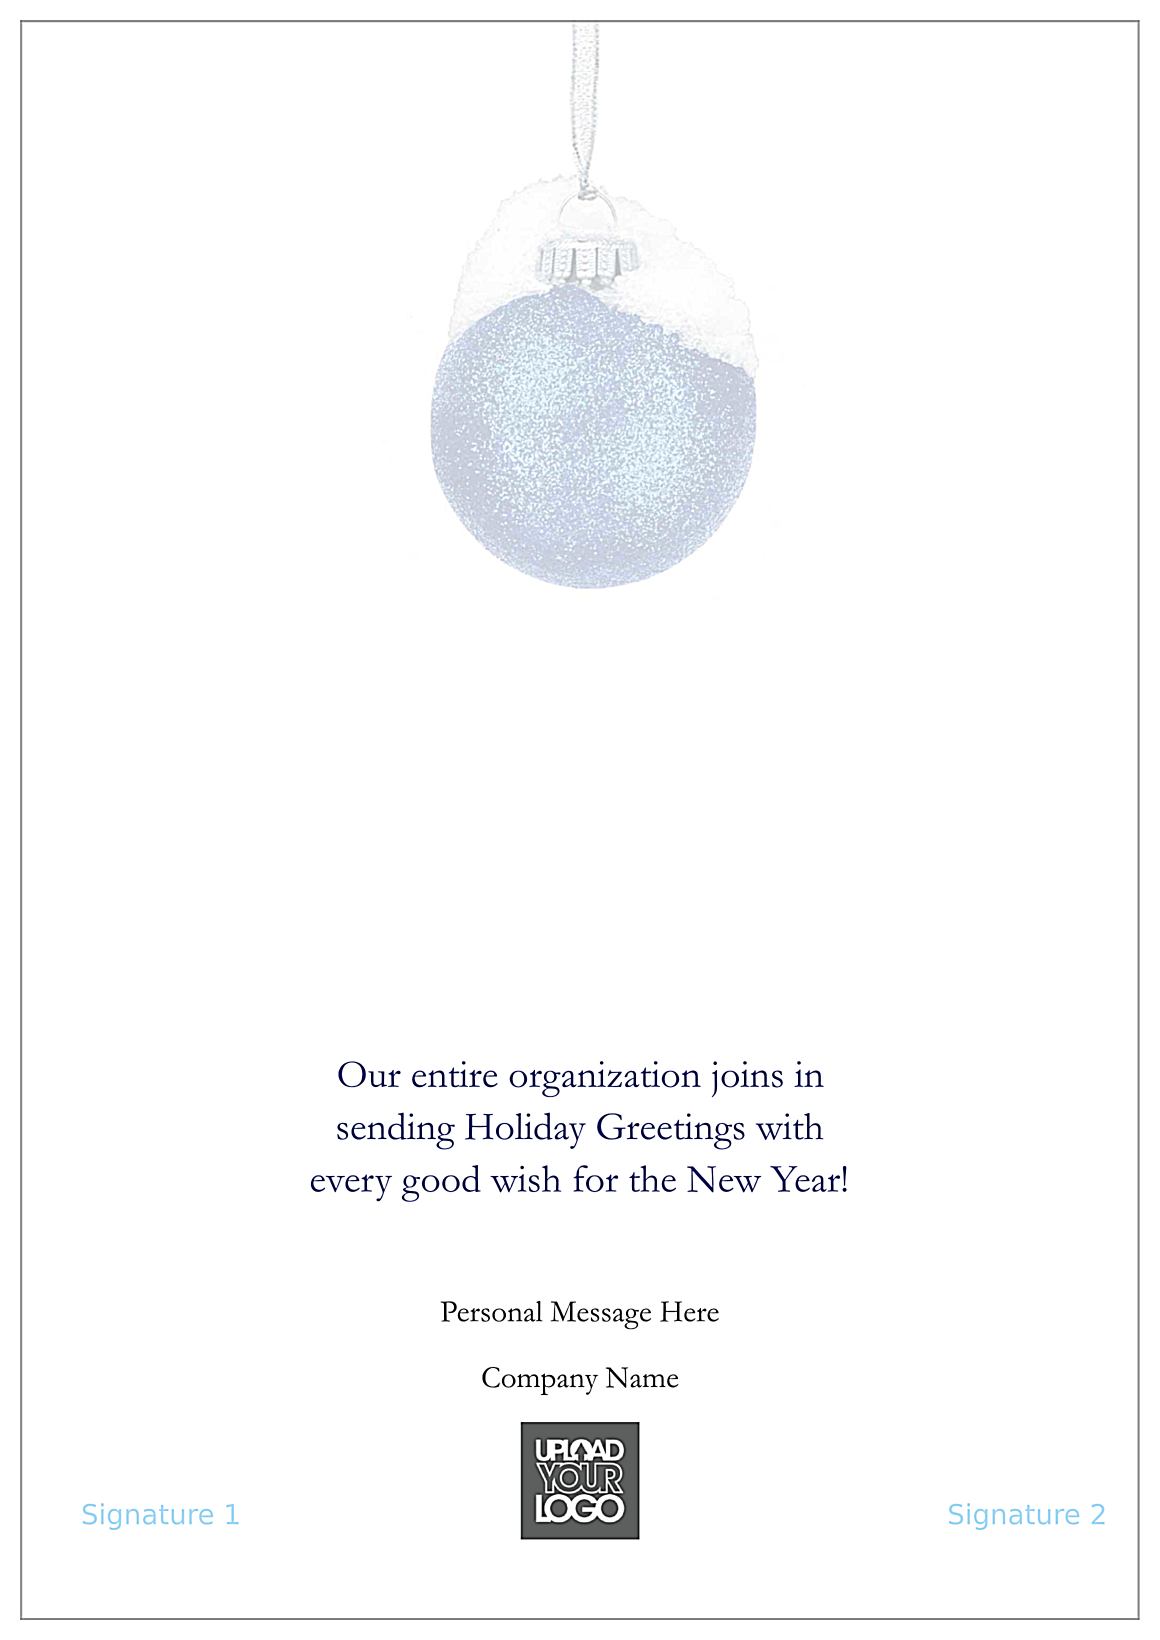 Holiday Blue and Silver back - Greeting Cards Maker